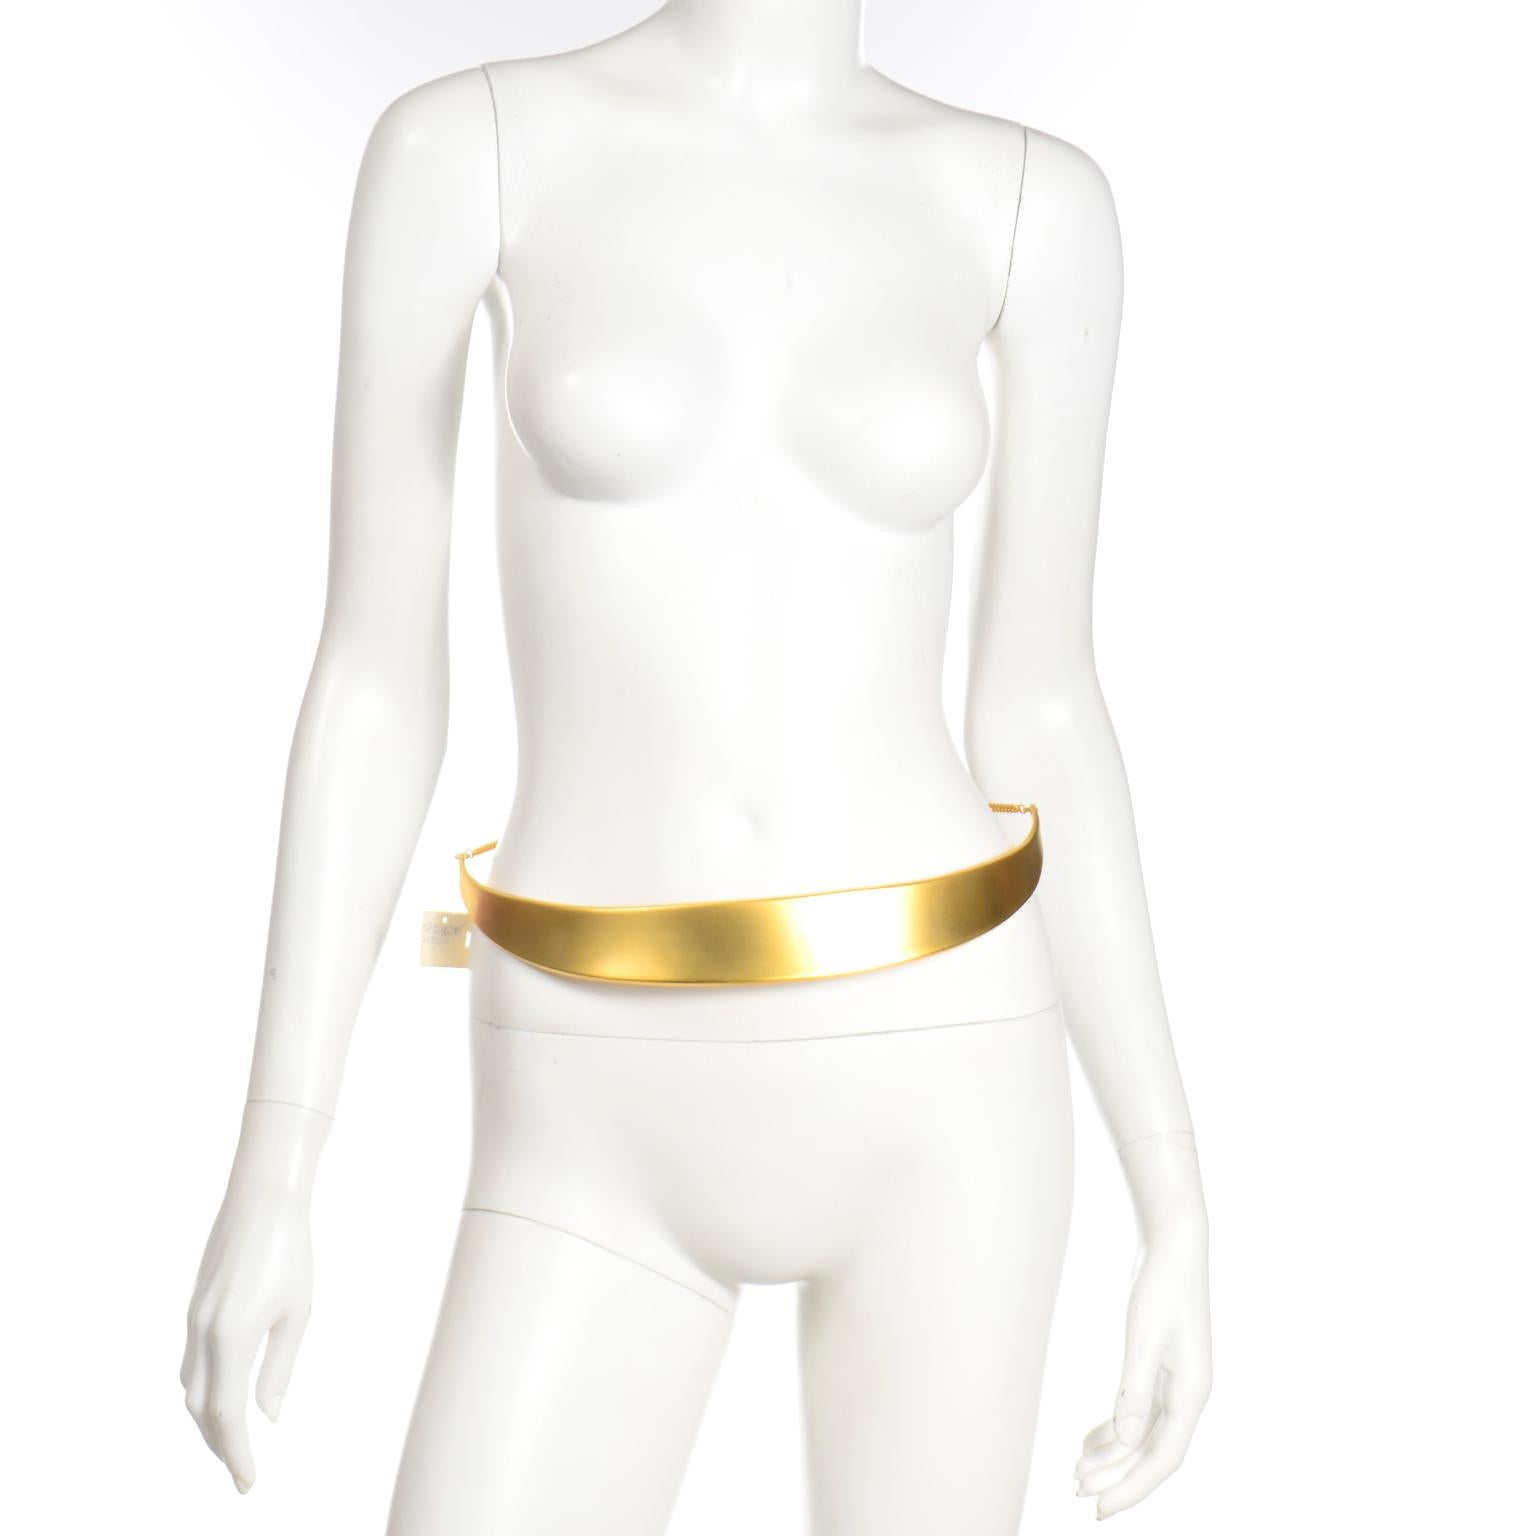 This is a rare, deadstock Robert Lee Morris for Donna Karan gold plated half moon waist belt. Robert Lee Morris Donna Karan pieces have such a rich, refined look, and we grab them whenever we can!There is a chain that wraps around the back of the